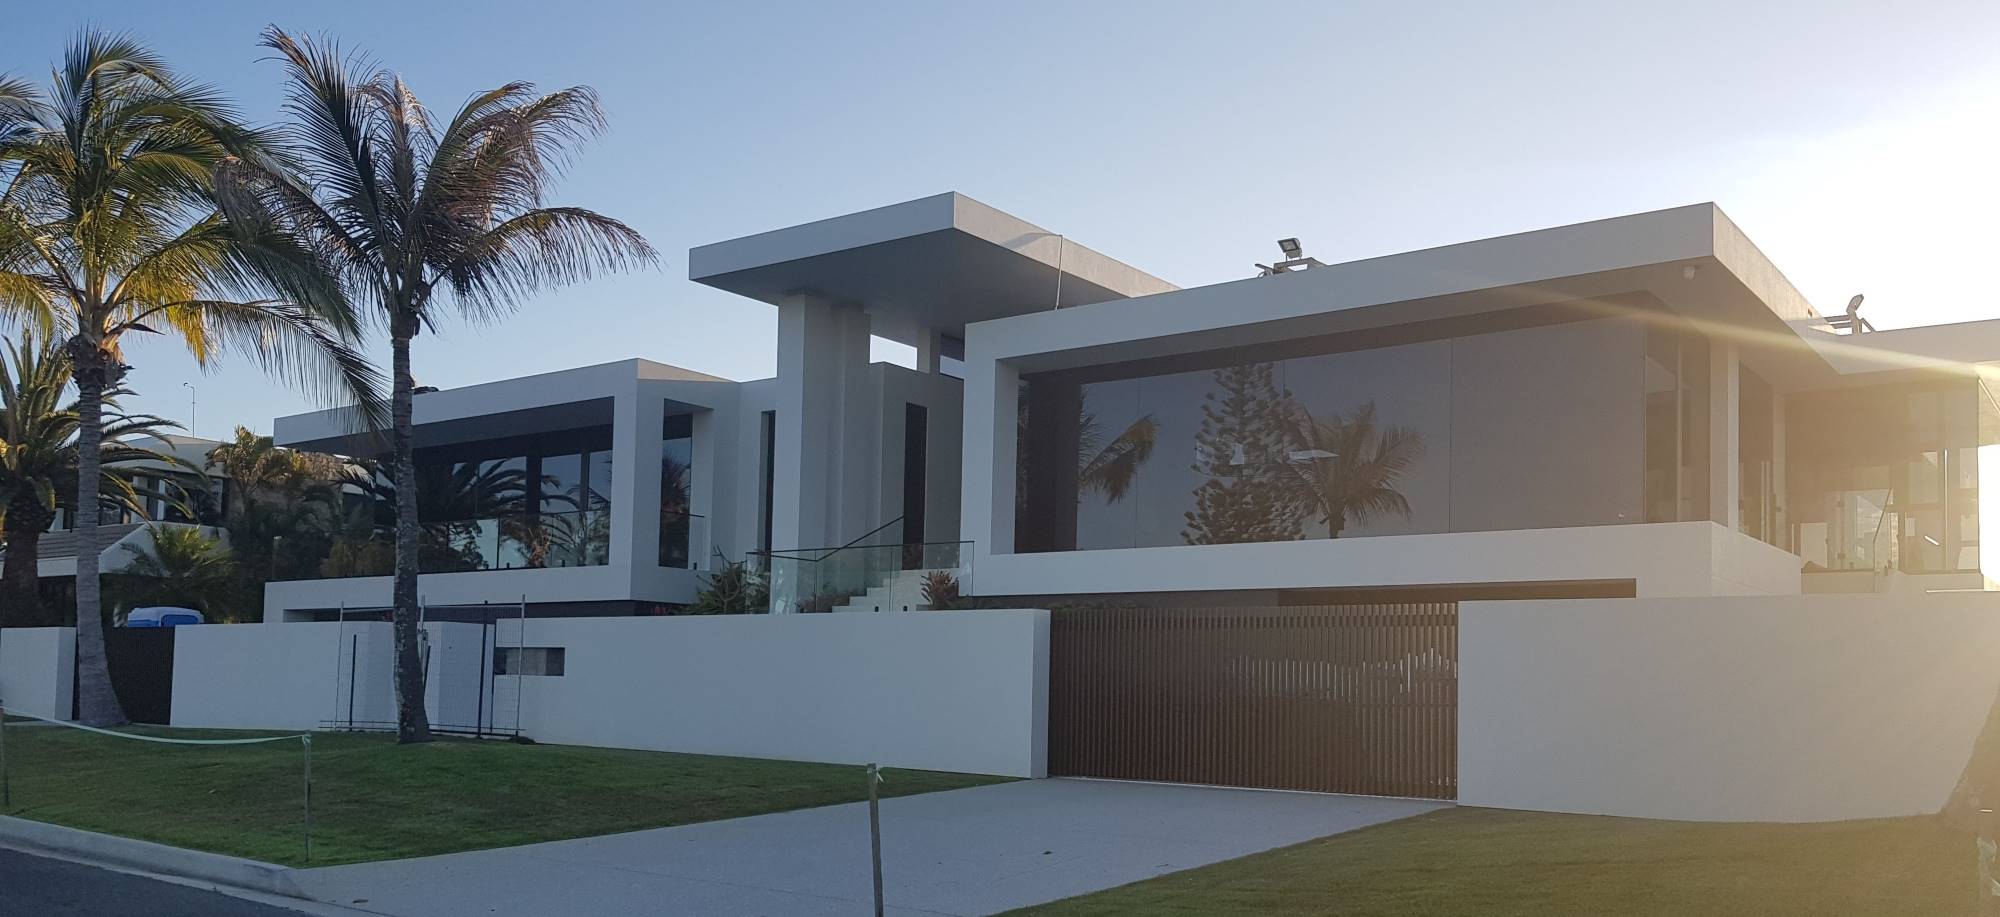 Facade of a luxury custom home in Runaway Bay with grand entry and palm trees